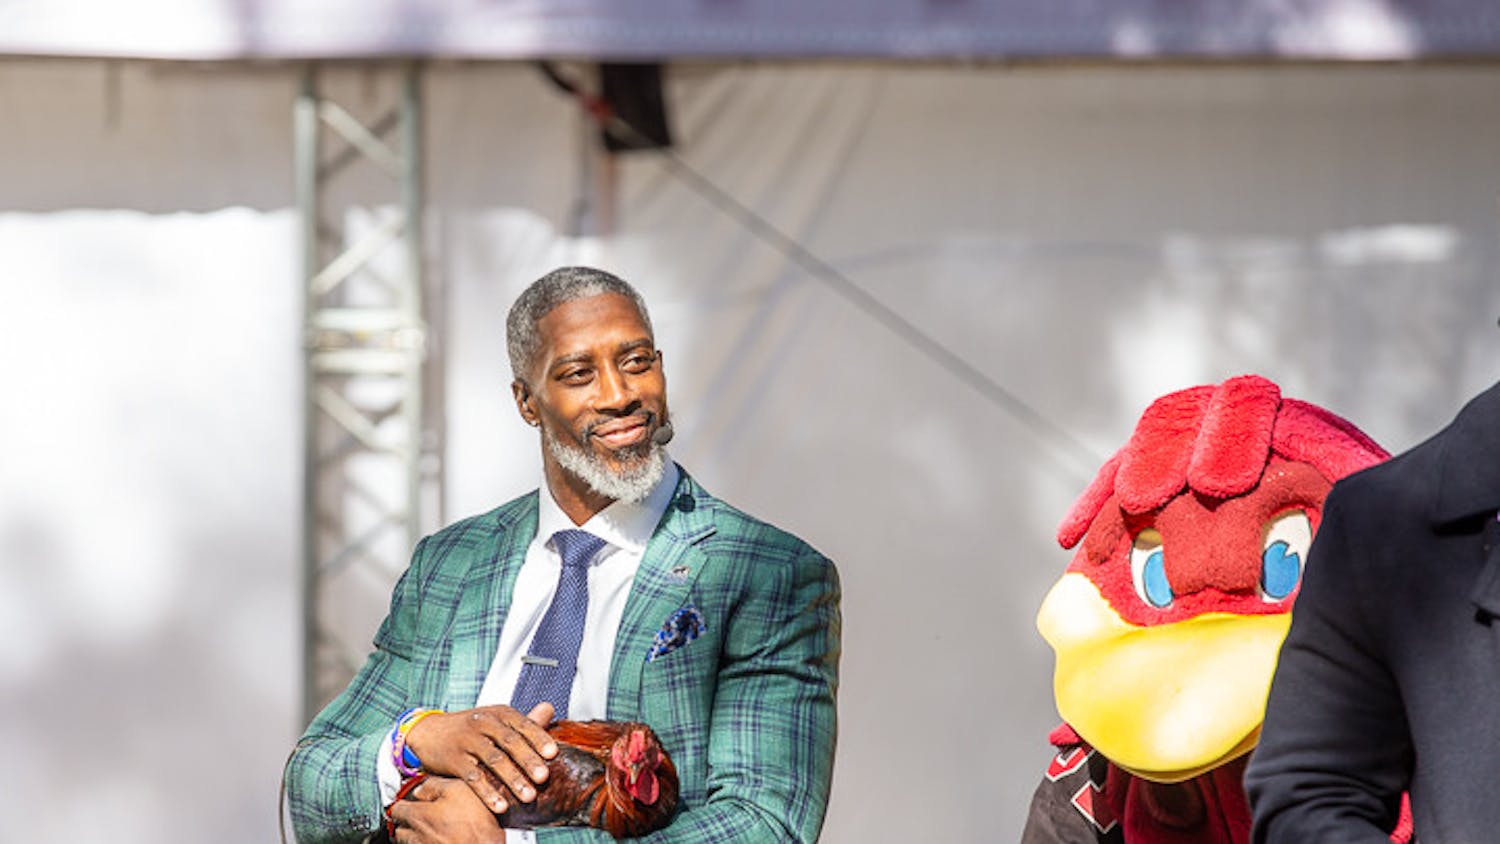 Roman Harper pets Sir Big Spur at the end of the SEC Nation morning show on Nov. 19, 2022. Harper played safety for Alabama and the New Orleans Saints.